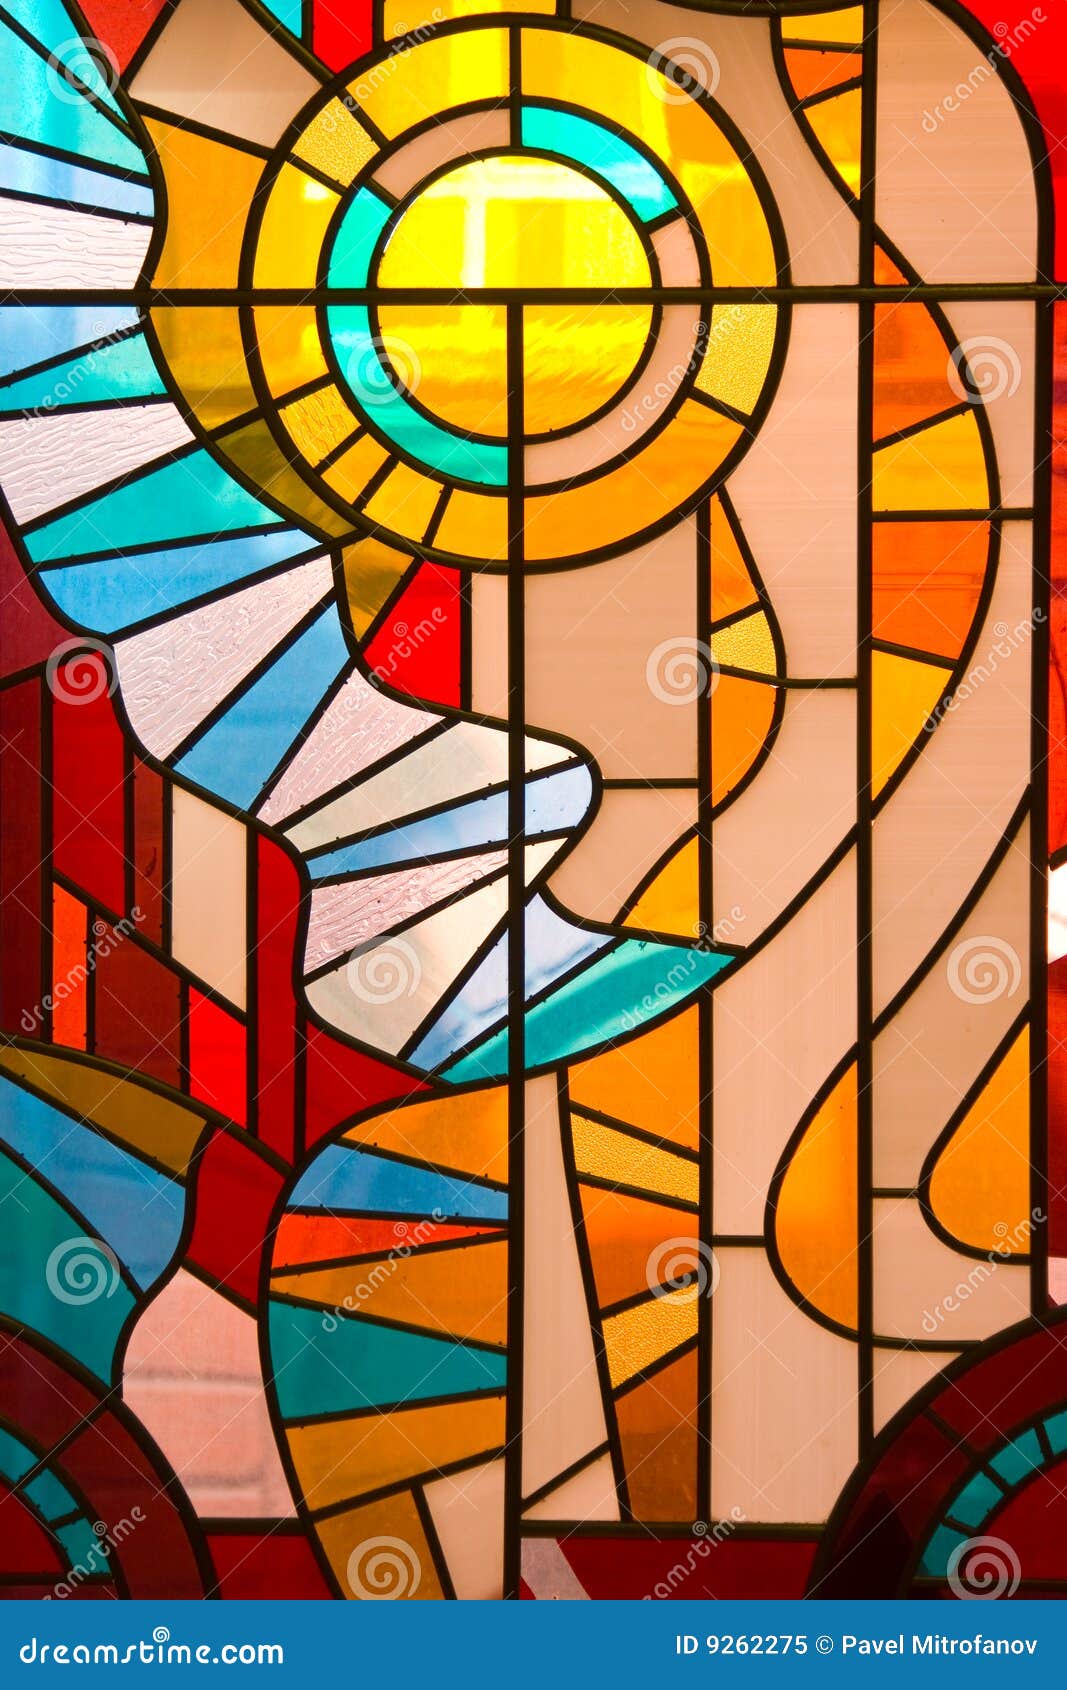 free stained glass clipart - photo #19